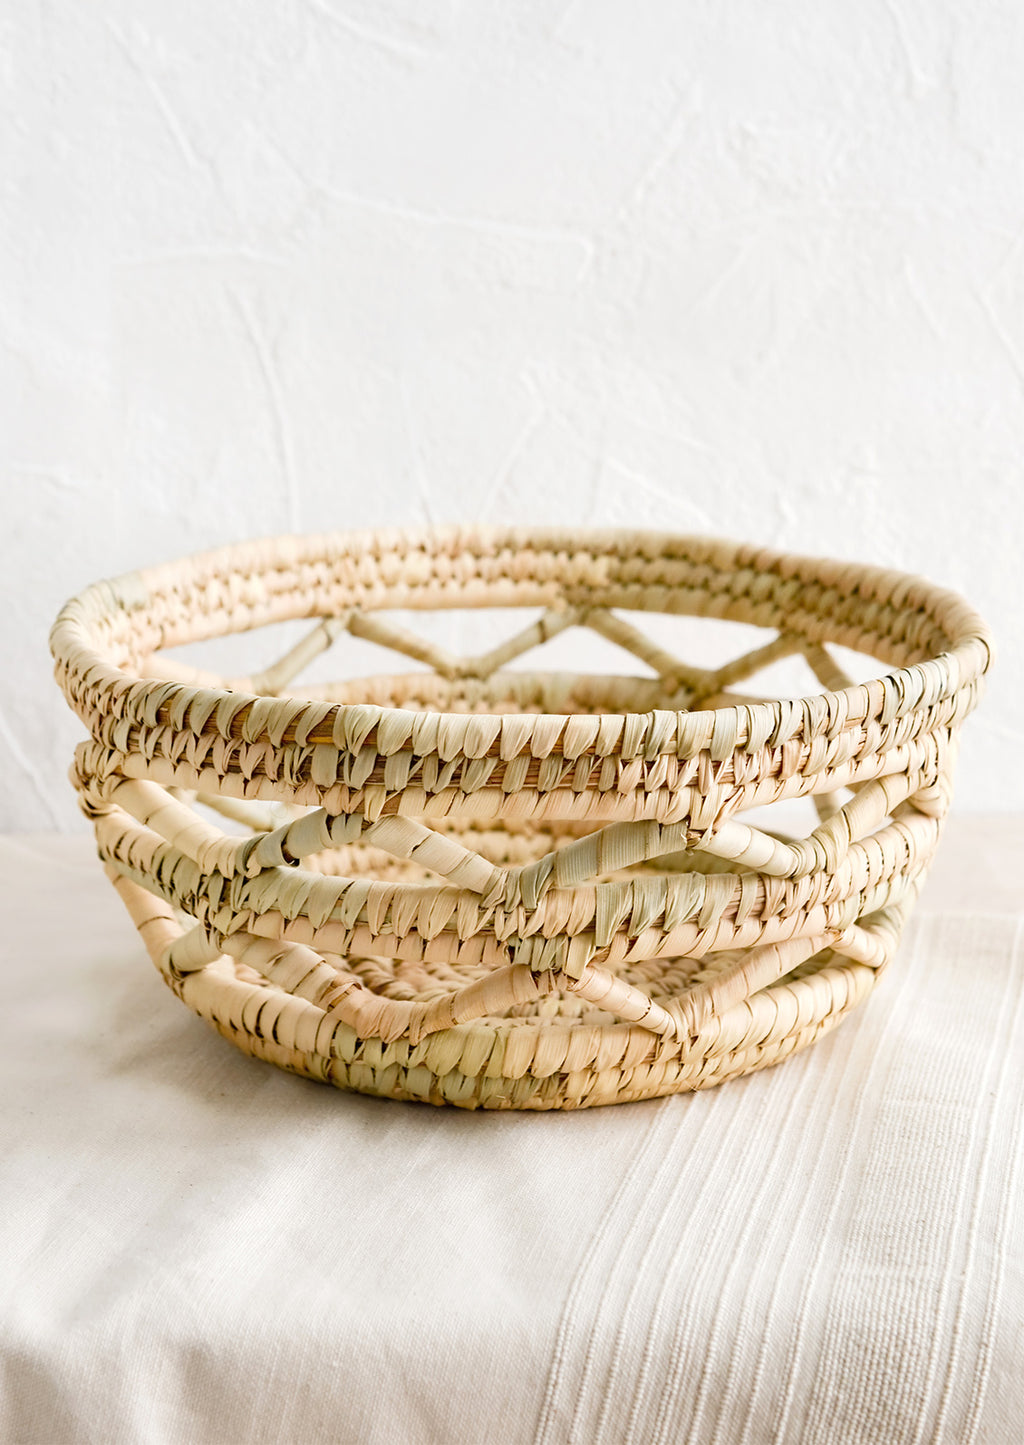 1: A storage bowl/basket made from dried palm leaves in an open weave design.